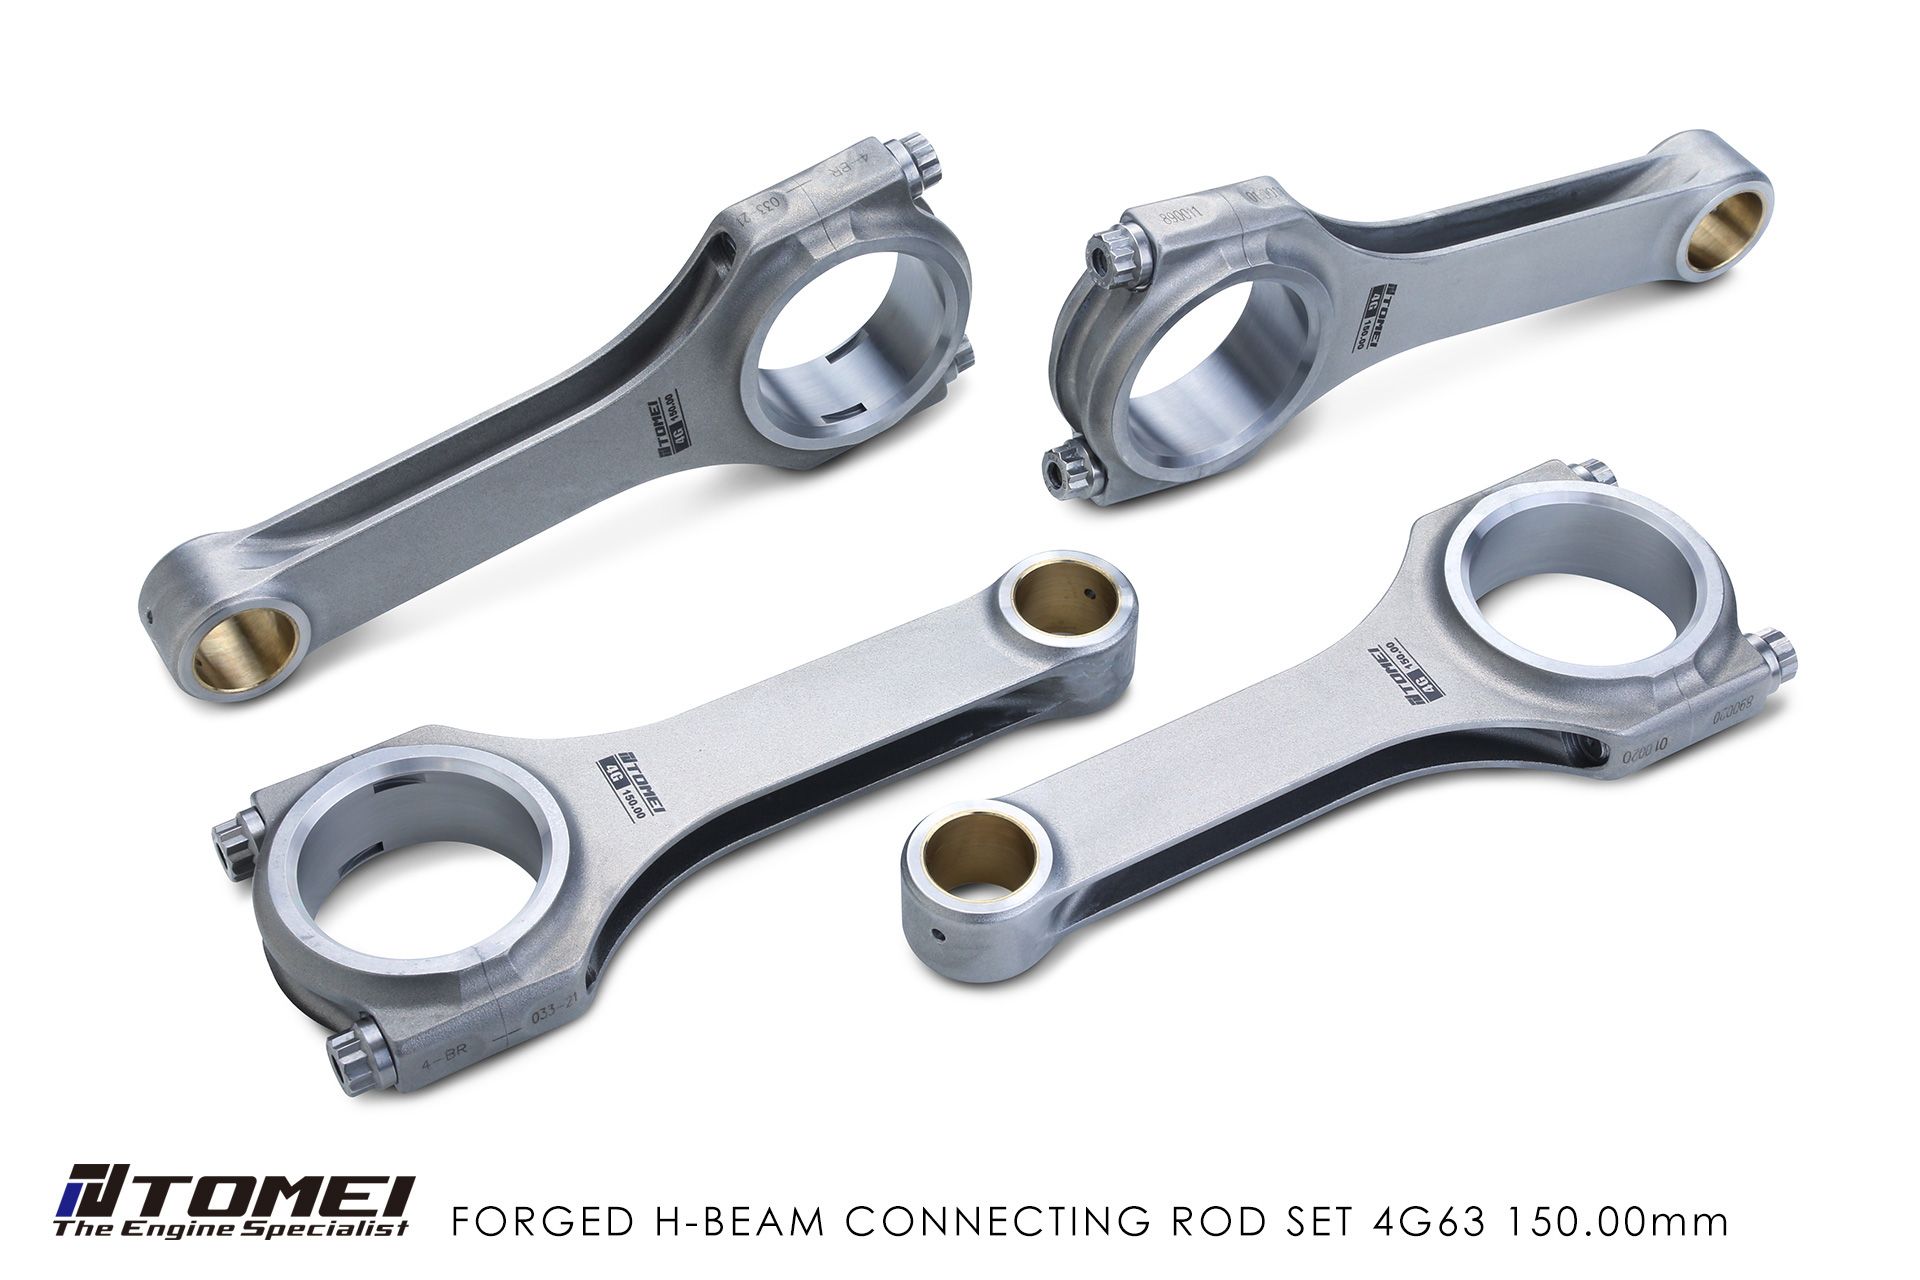 Tomei Forged H-Beam Connecting Rod Set 4G63 150mm